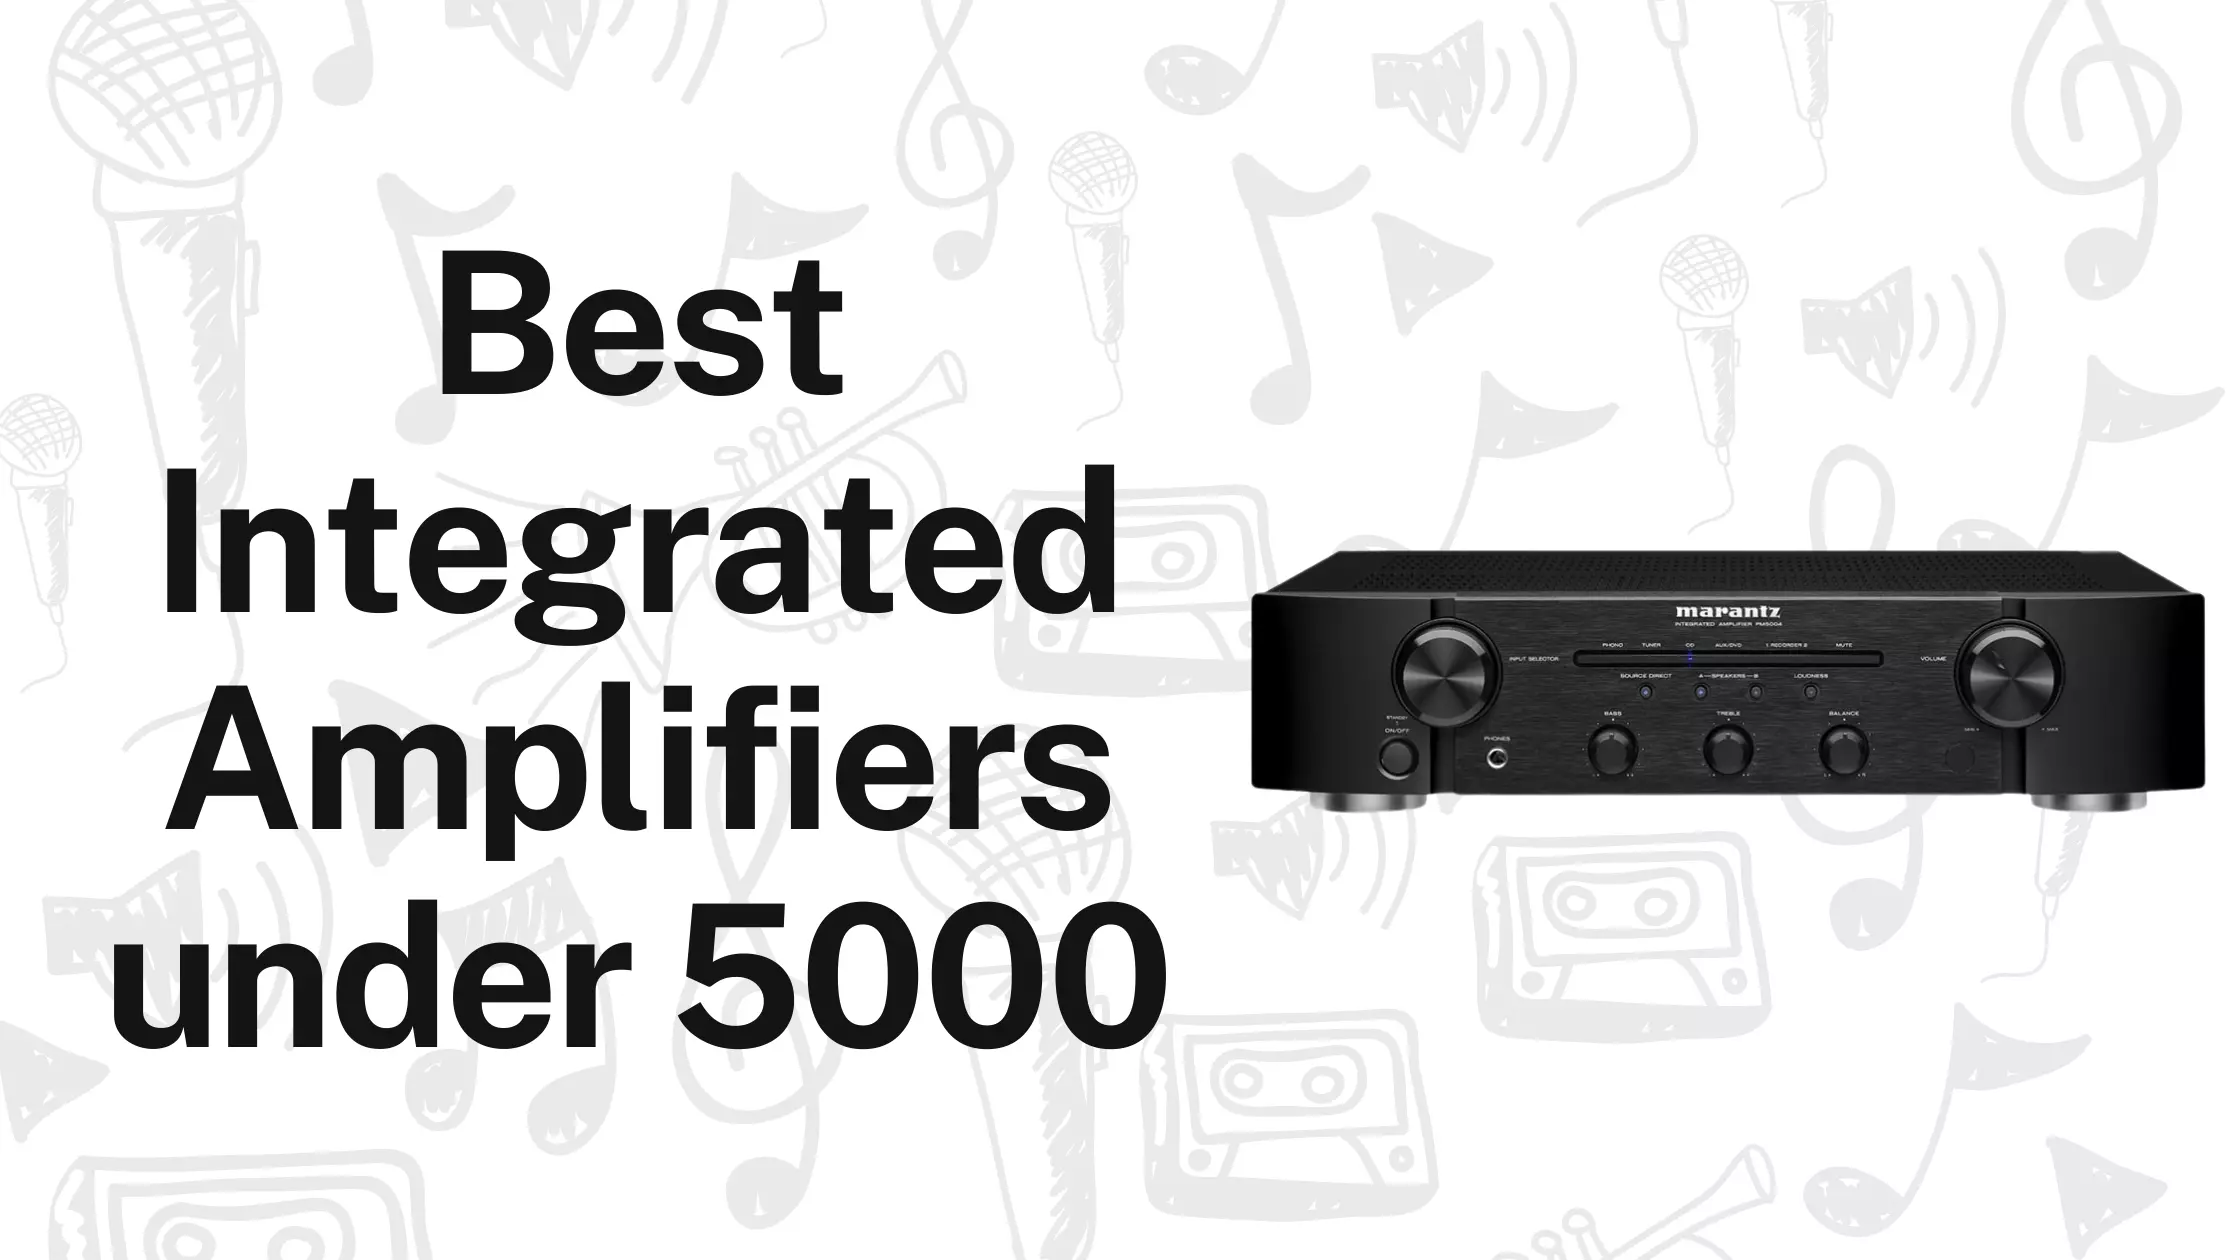 Best Integrated Amplifiers under $5000 Reviews and Buying Guide